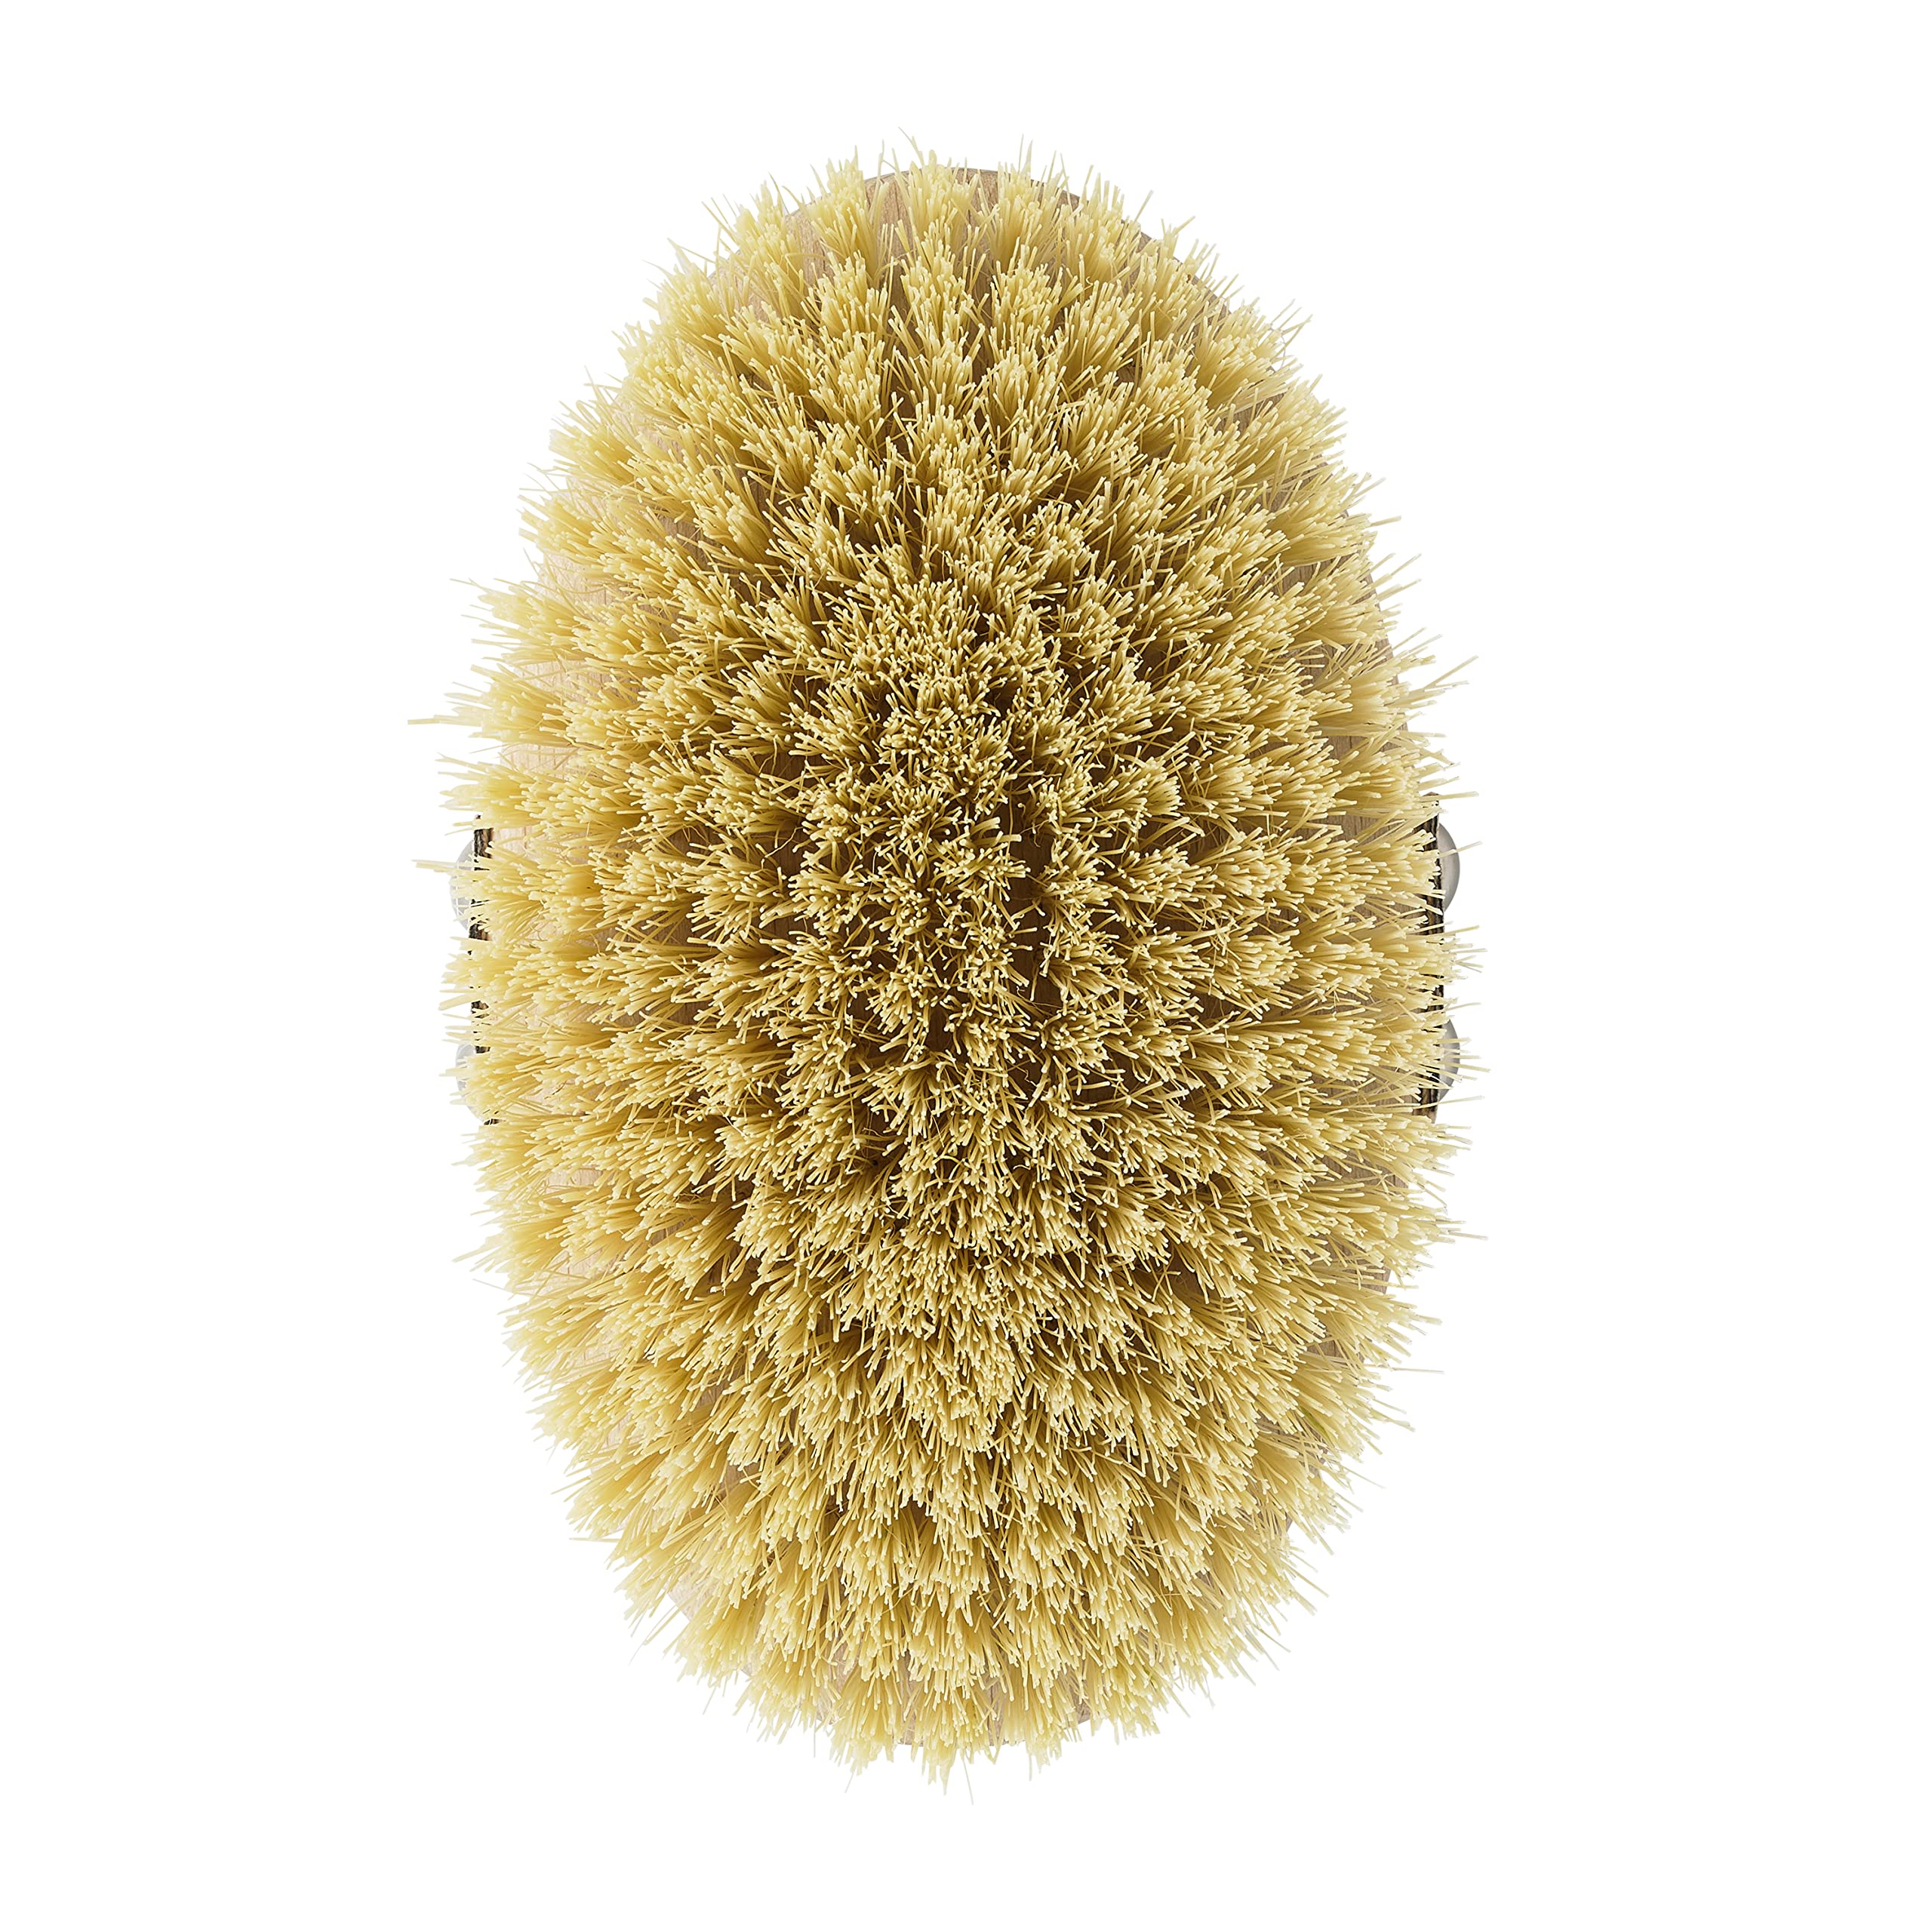 Aromatherapy Associates Revive Body Brush. Natural Dry Brush to Exfoliate Skin and Boost Circulation. Made of Natural and Sustainable Materials (1 Count)